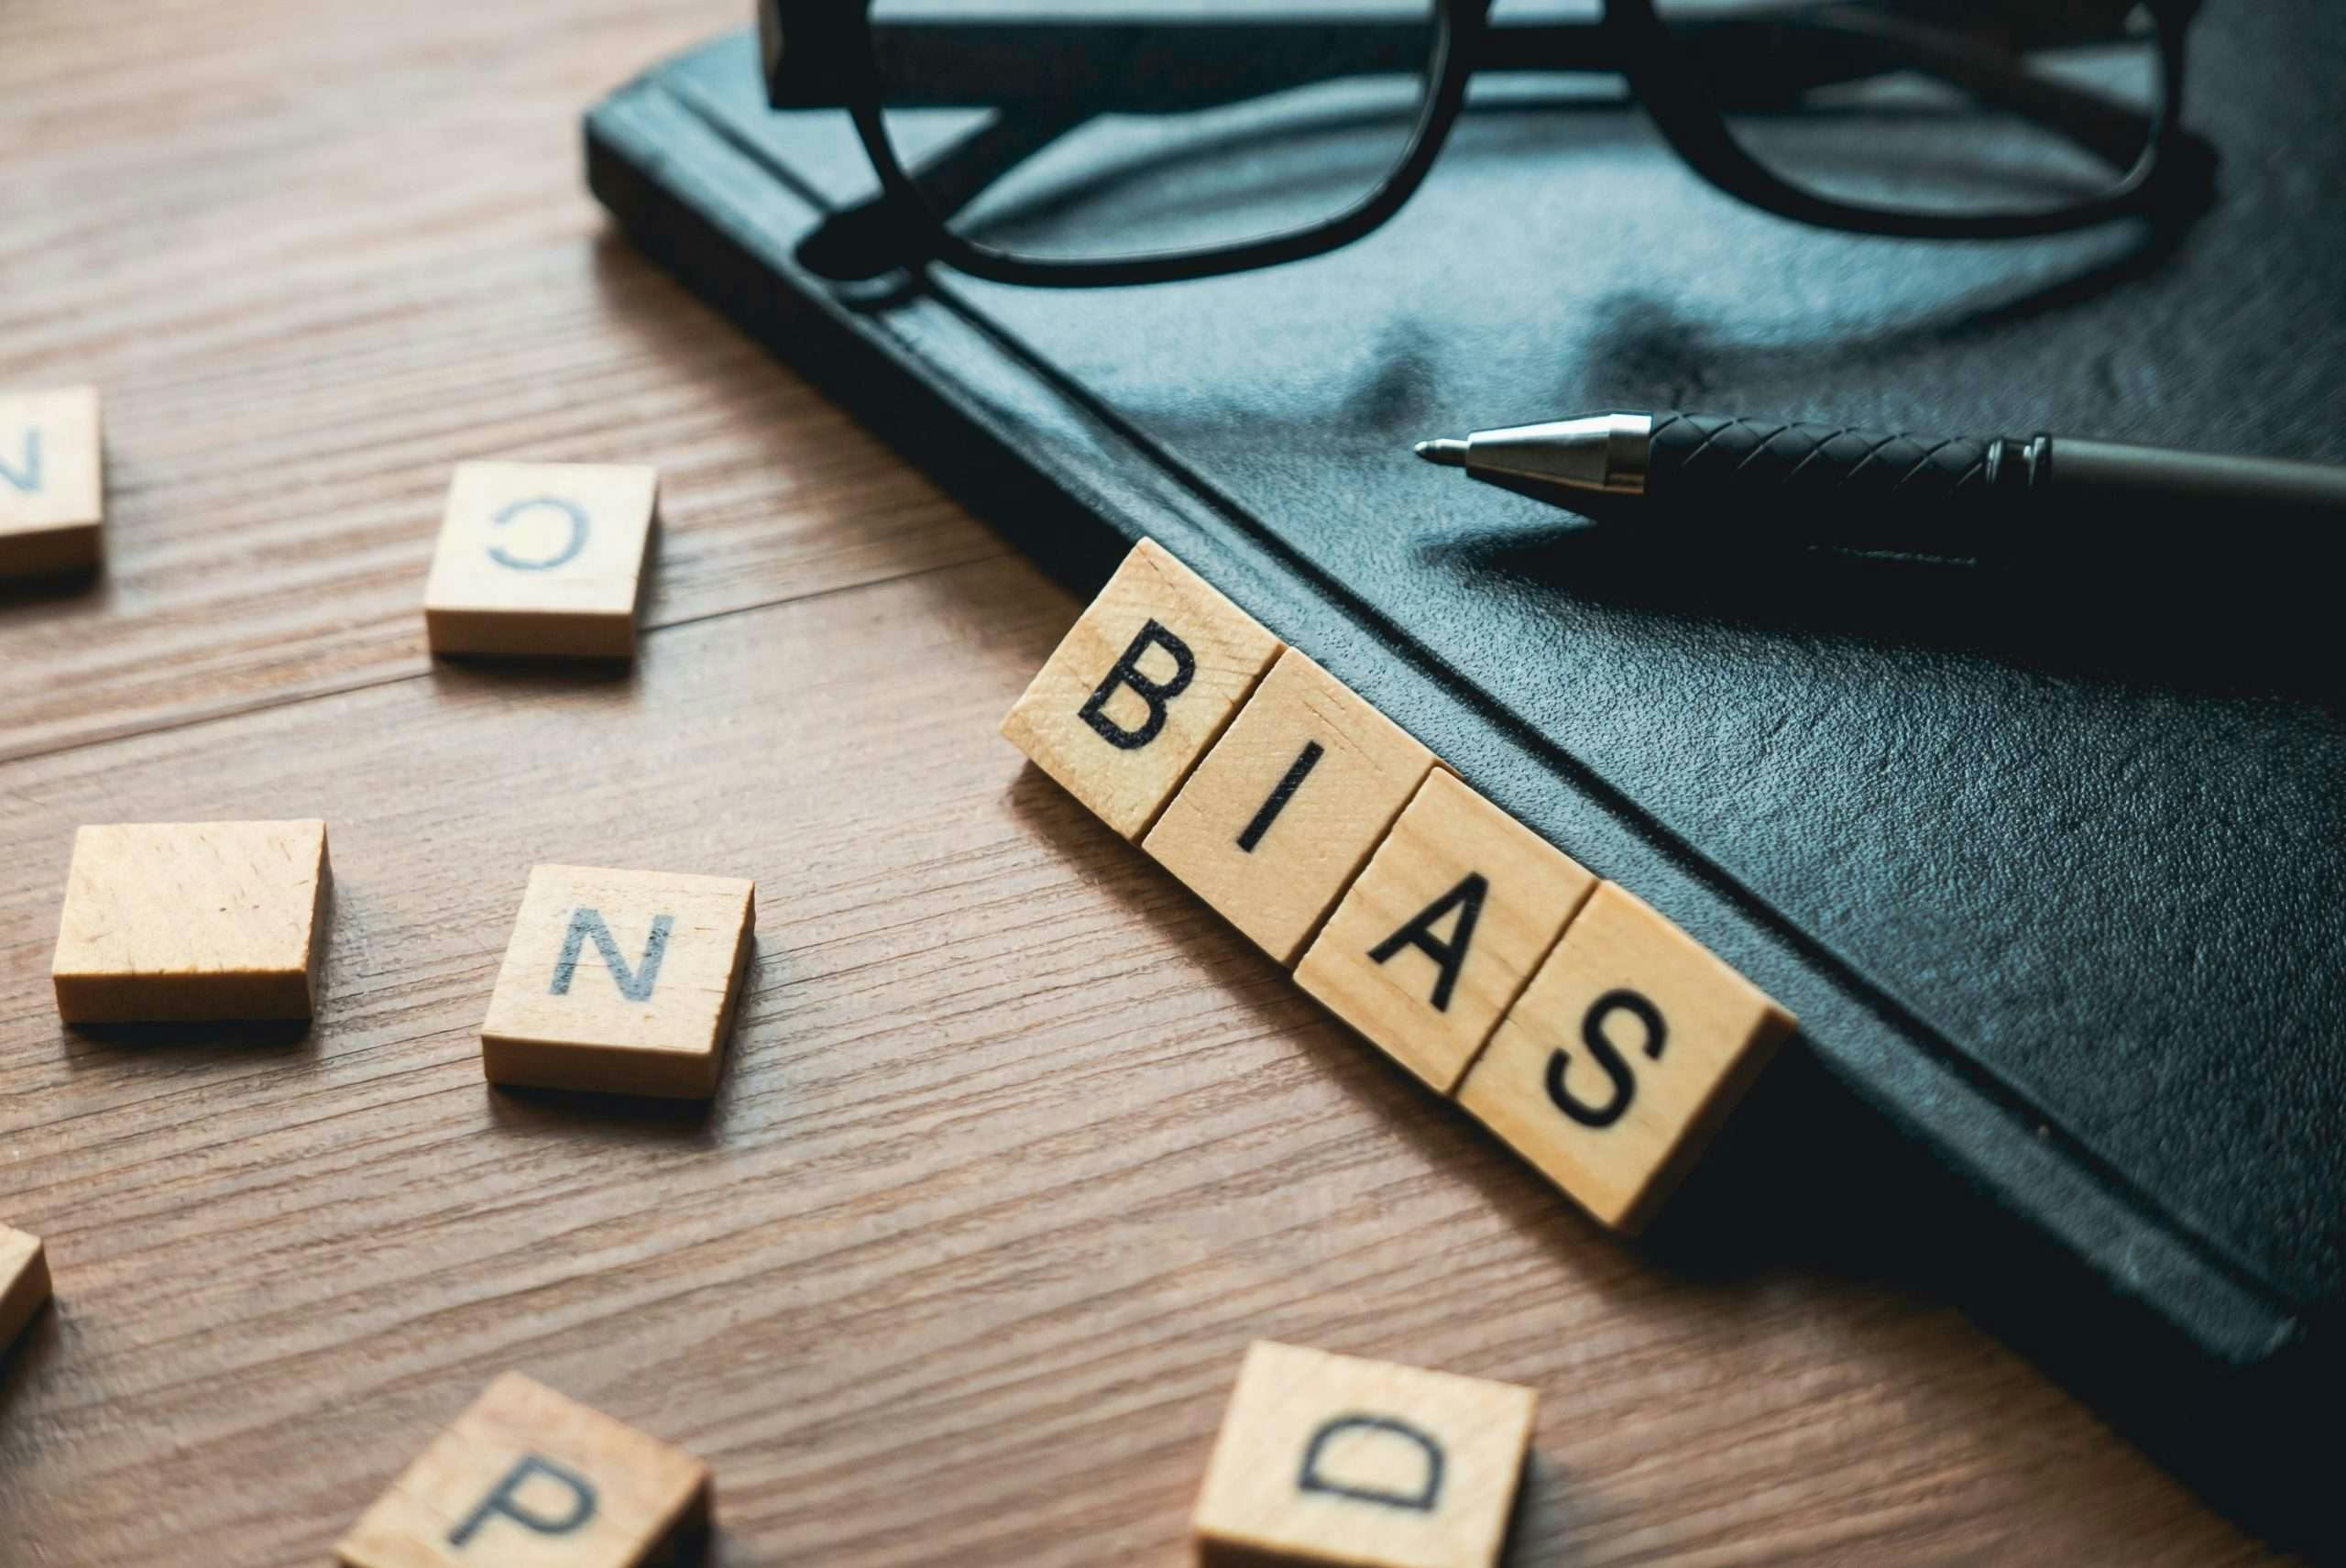 Unpacking the Ethics of Implicit Bias and Its Remediation